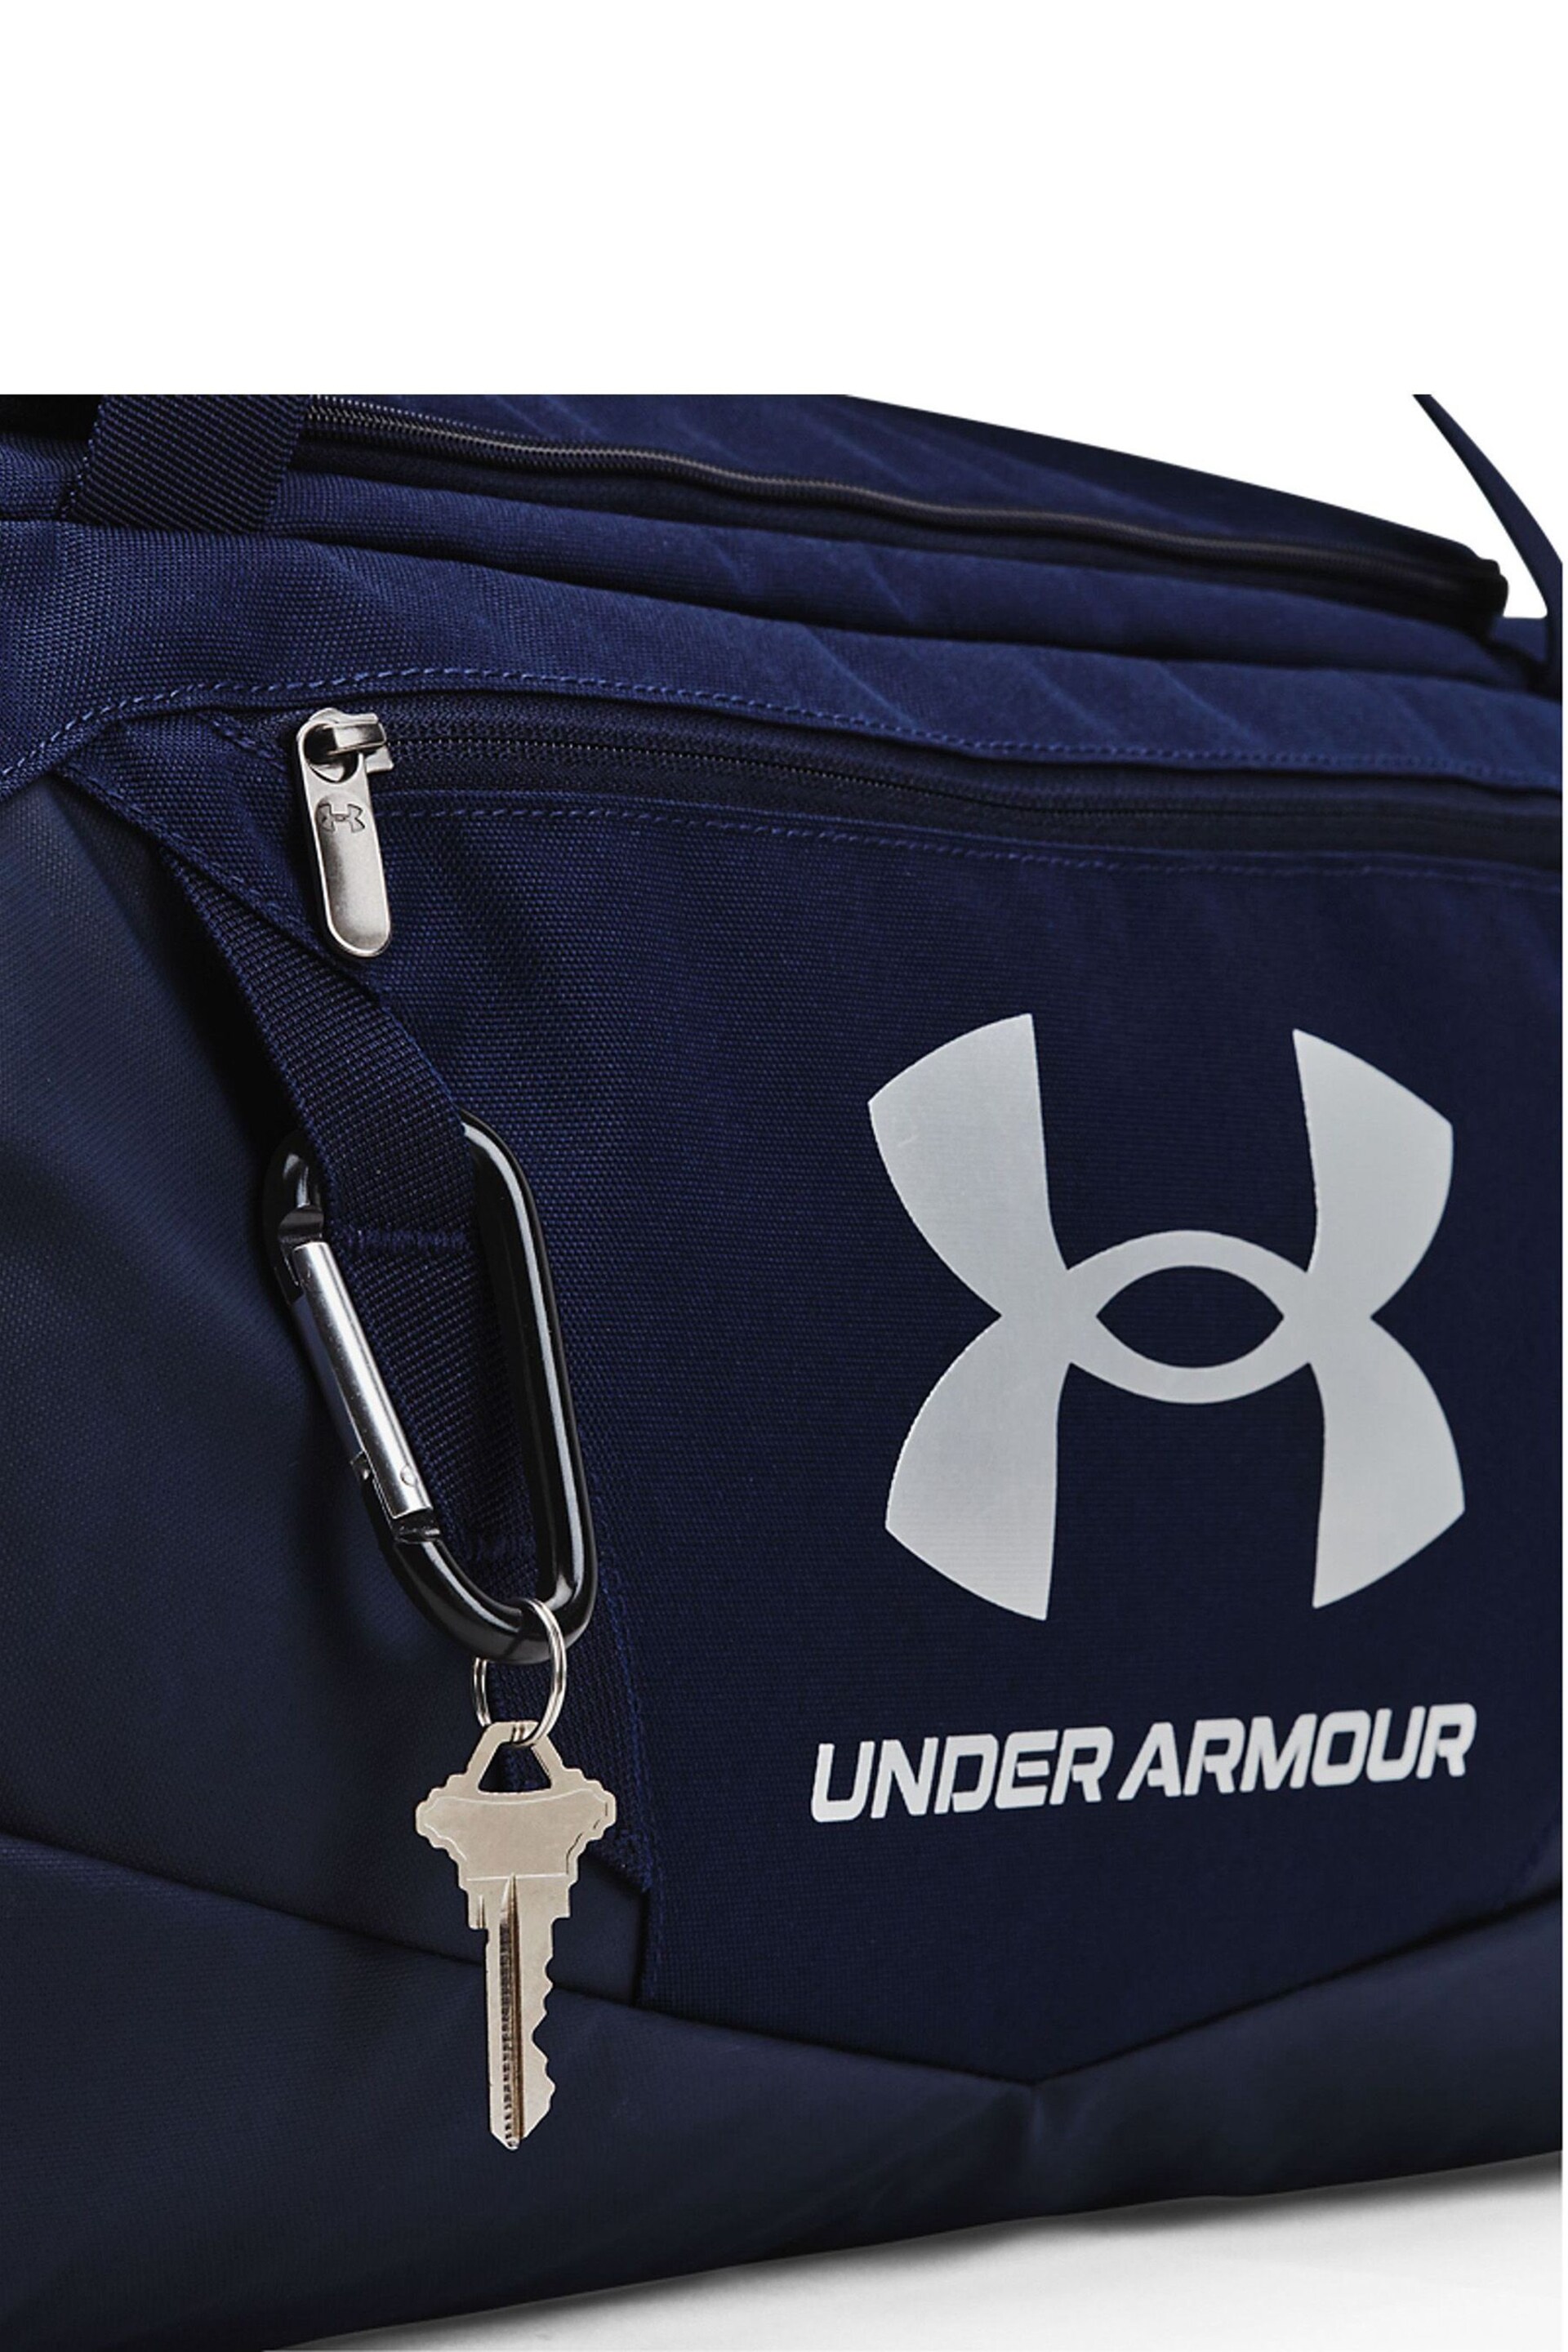 Under Armour Blue Undeniable 5.0 Small Duffle Bag - Image 5 of 8